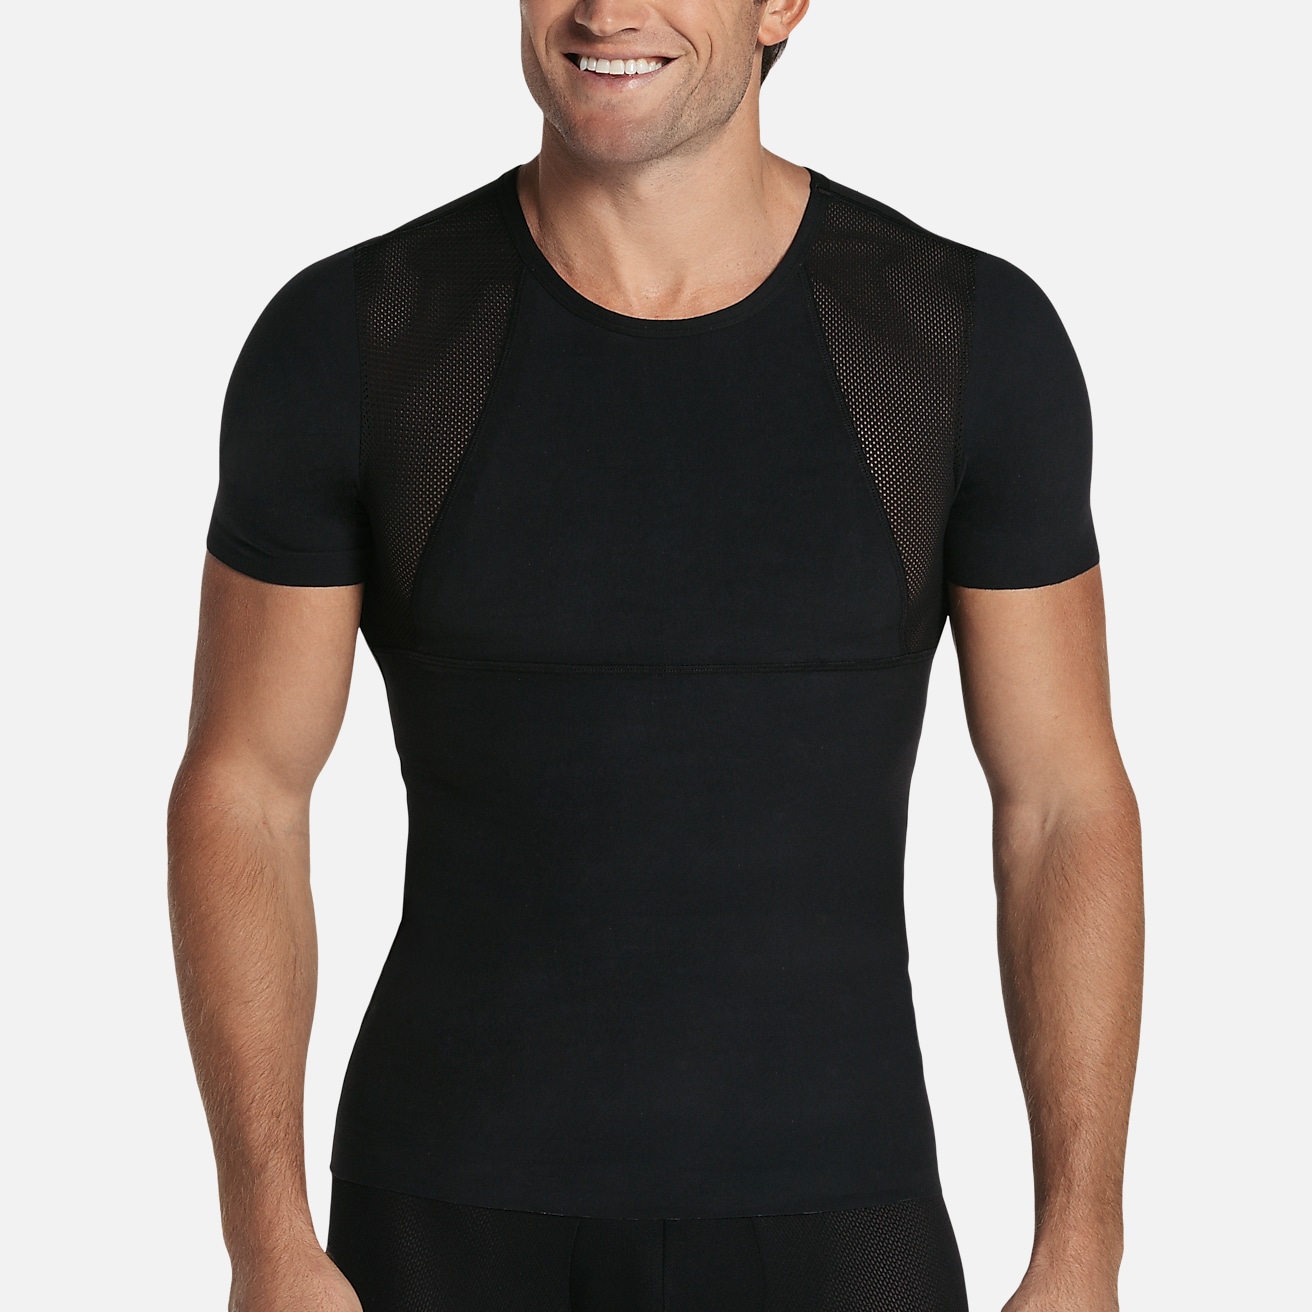 Insta Slim Compression Muscle Tank, Undershirts, Clothing & Accessories